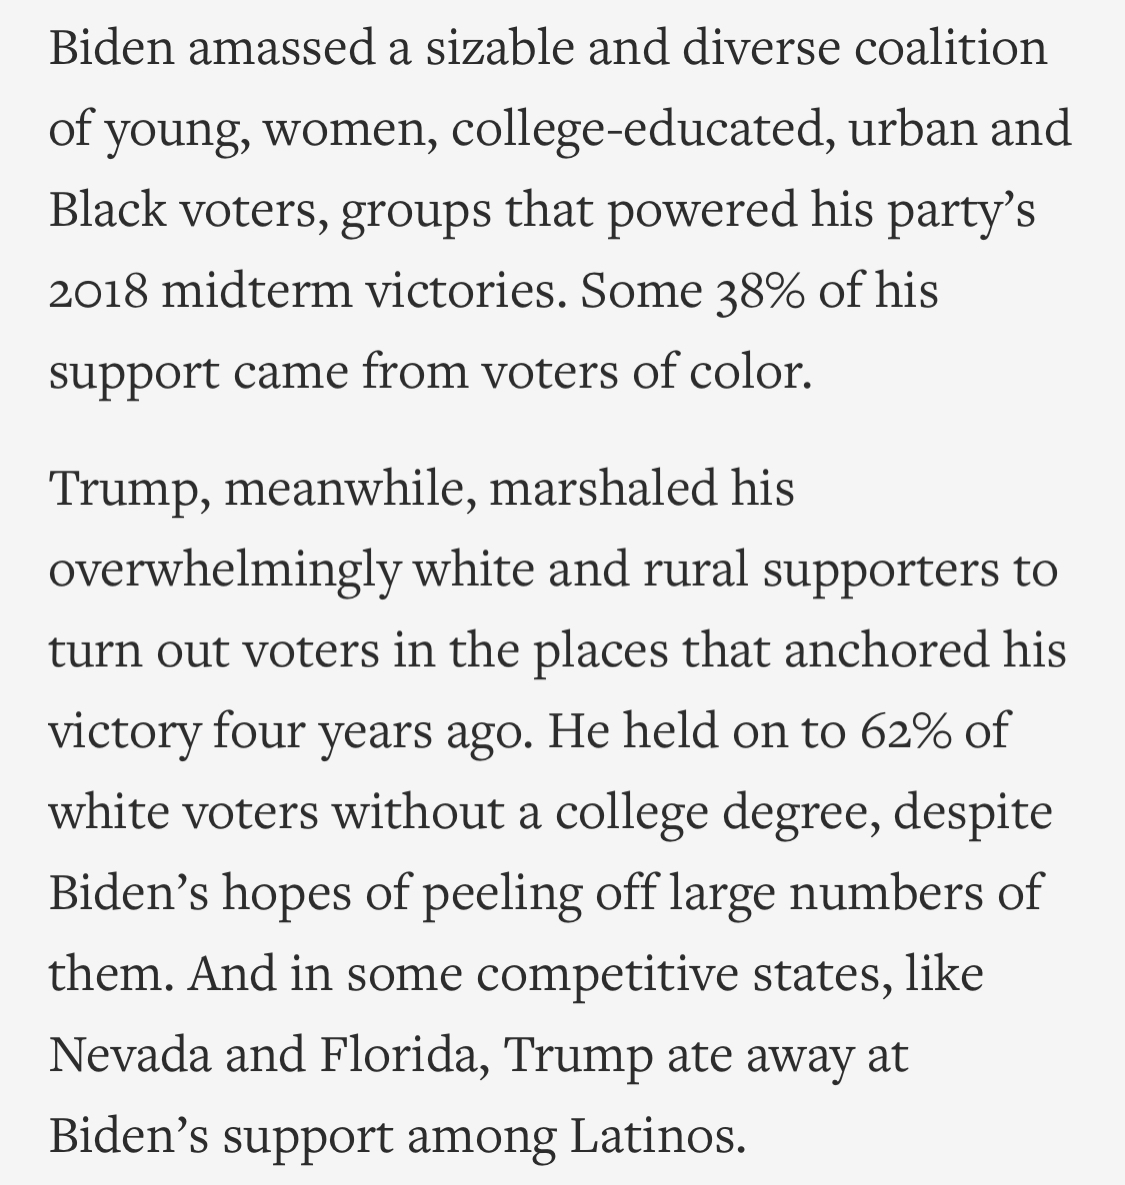 If you say "white people" it's "playing the race card."For instance, if I say "white people voted for Trump", eleventy-million white people will reply that they didn't.You gotta break them down by religion, education or even their address. Who voted for Biden?Black people